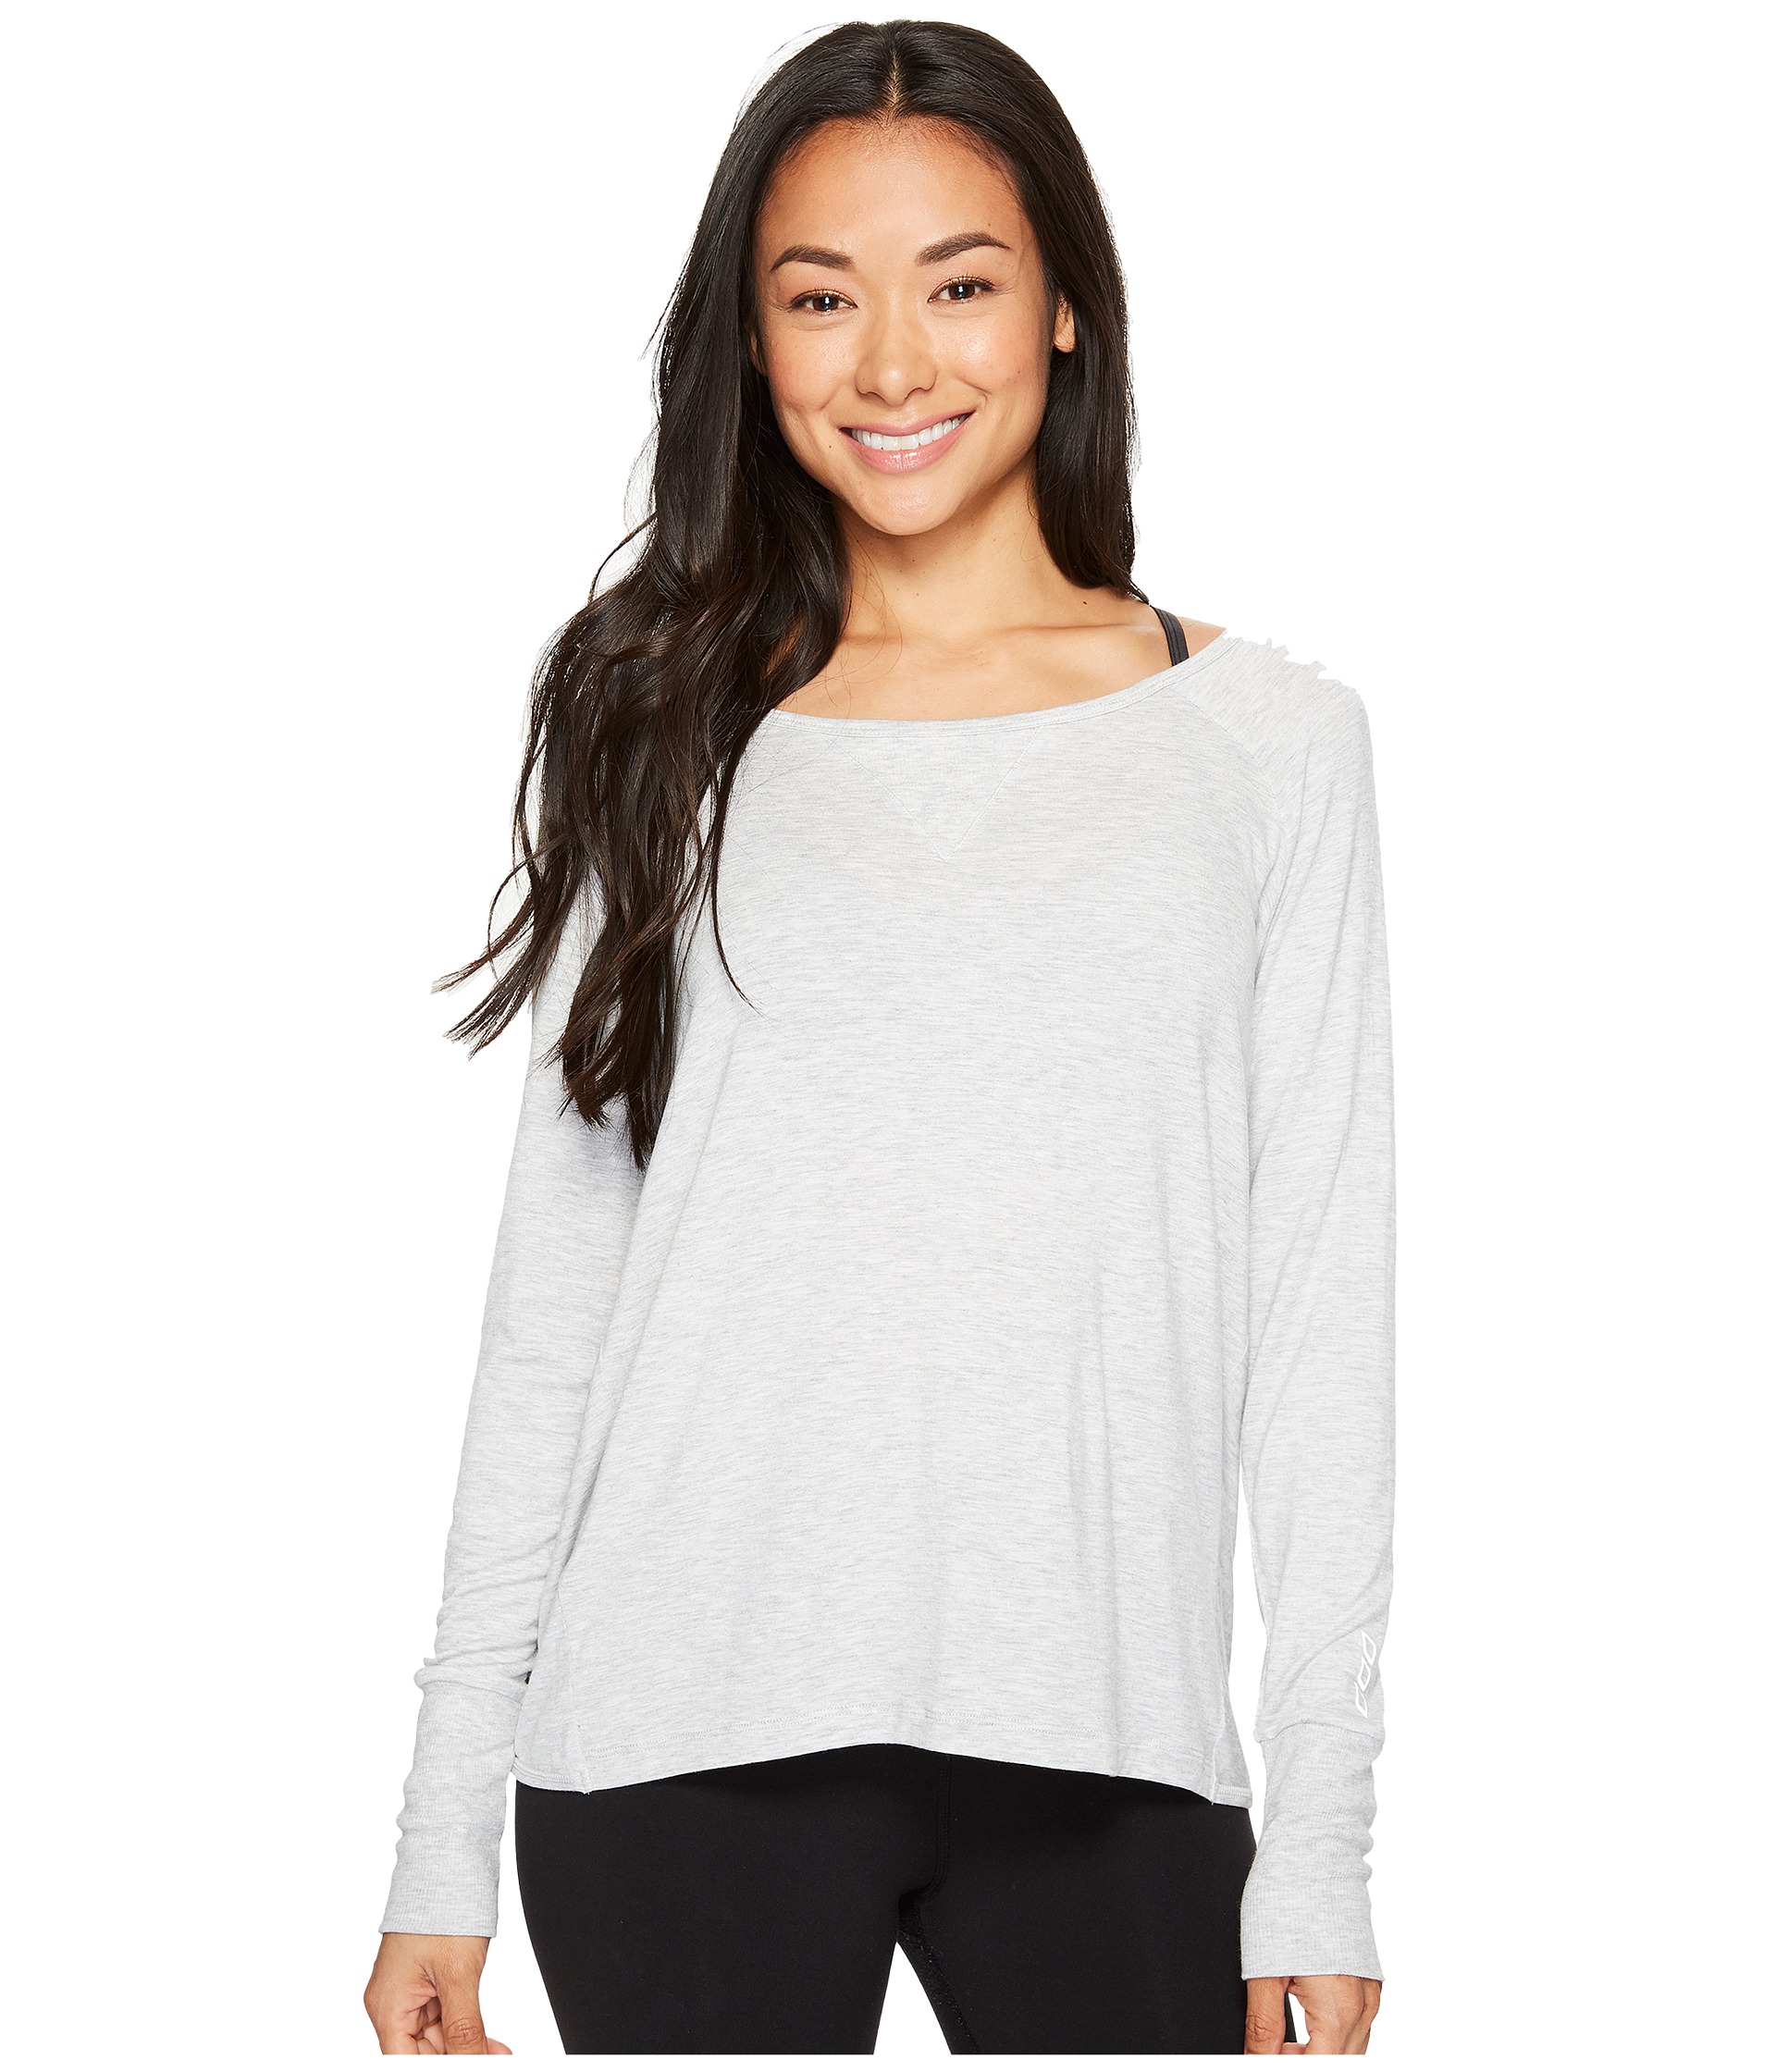 Lorna Jane Post Workout Long Sleeve Top at Zappos.com